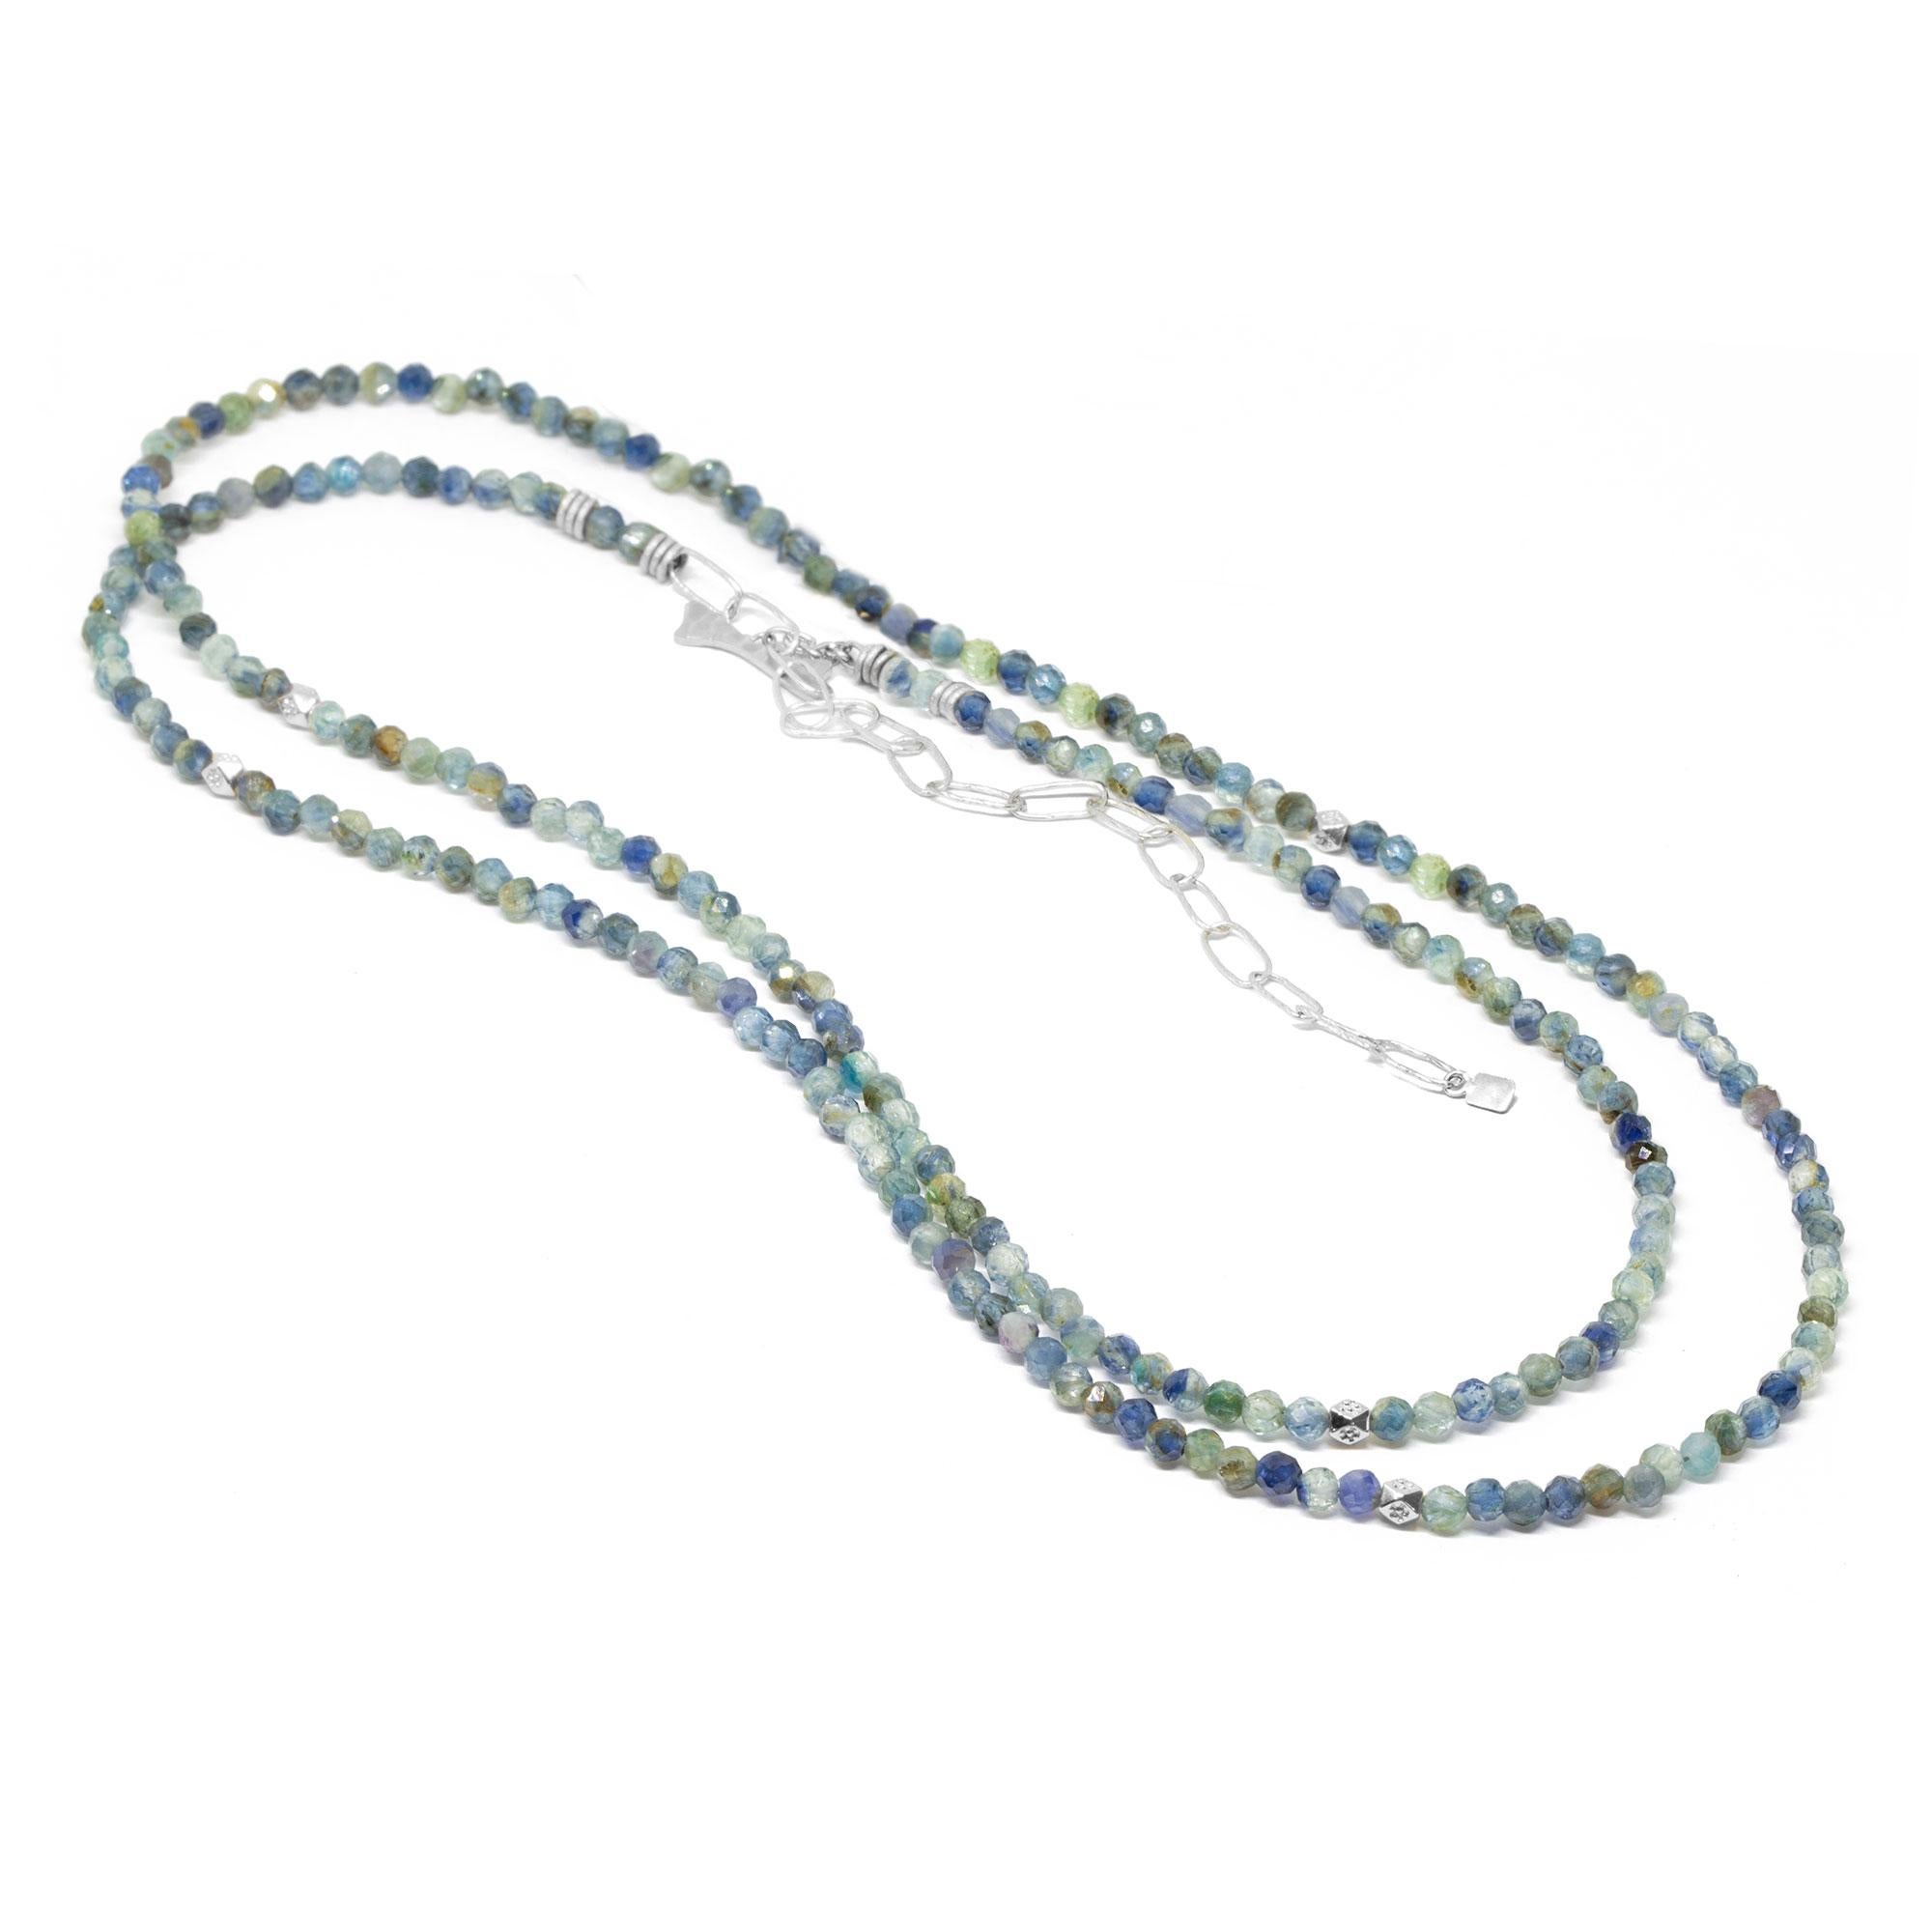 The best part about our Chloe Silver Gemstone Convertable Wrap isn’t just that it can be worn long, doubled-up, or as a wrap bracelet (although that’s pretty cool). It’s that you can thread any of our Charms onto the kyanite beads—have fun playing